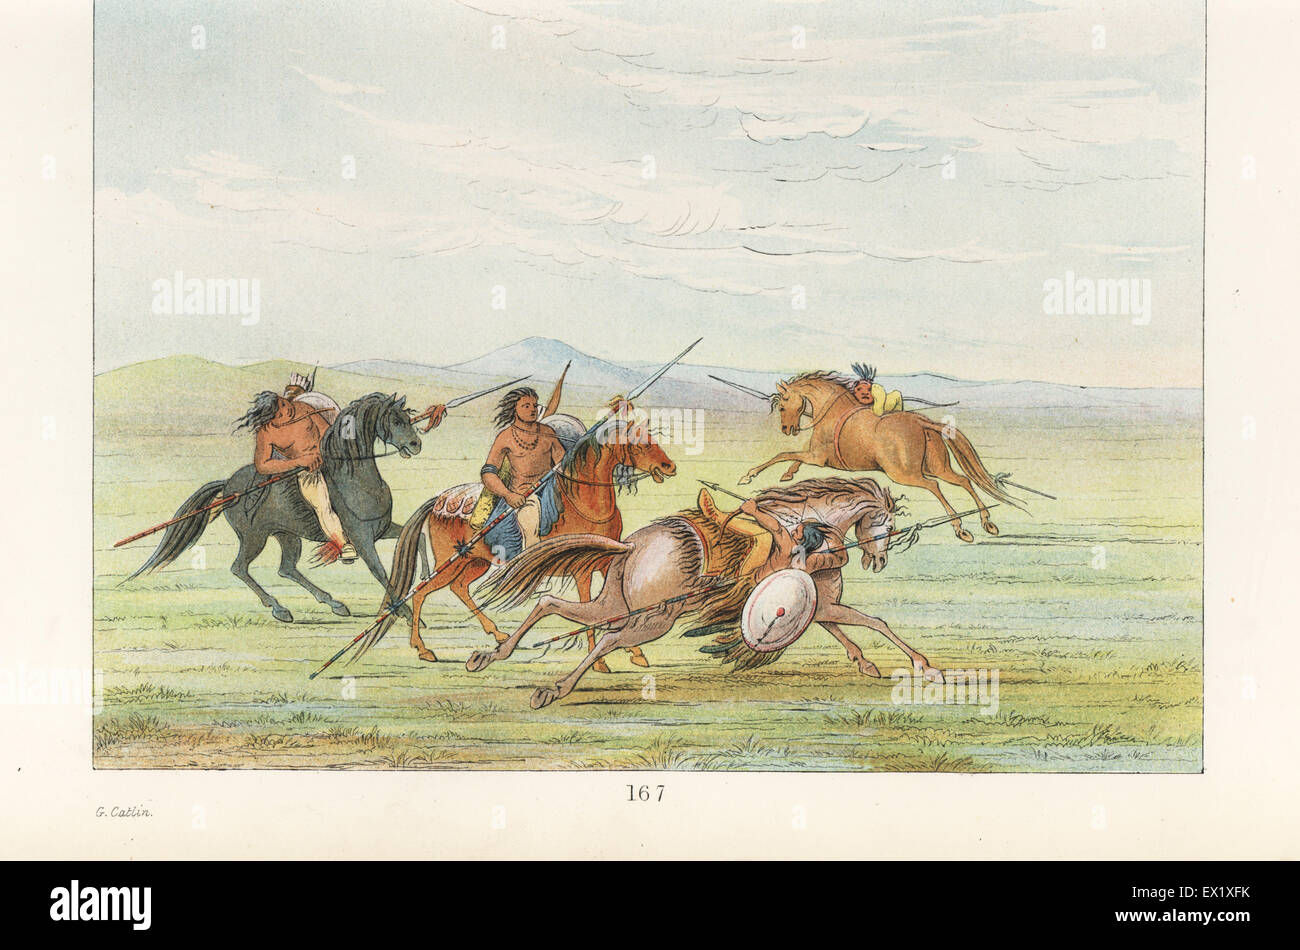 Comanche warriors performing riding tricks and battle exercises, hanging off one side of the horse at full speed, etc. Handcoloured lithograph from George Catlin's Manners, Customs and Condition of the North American Indians, London, 1841. Stock Photo